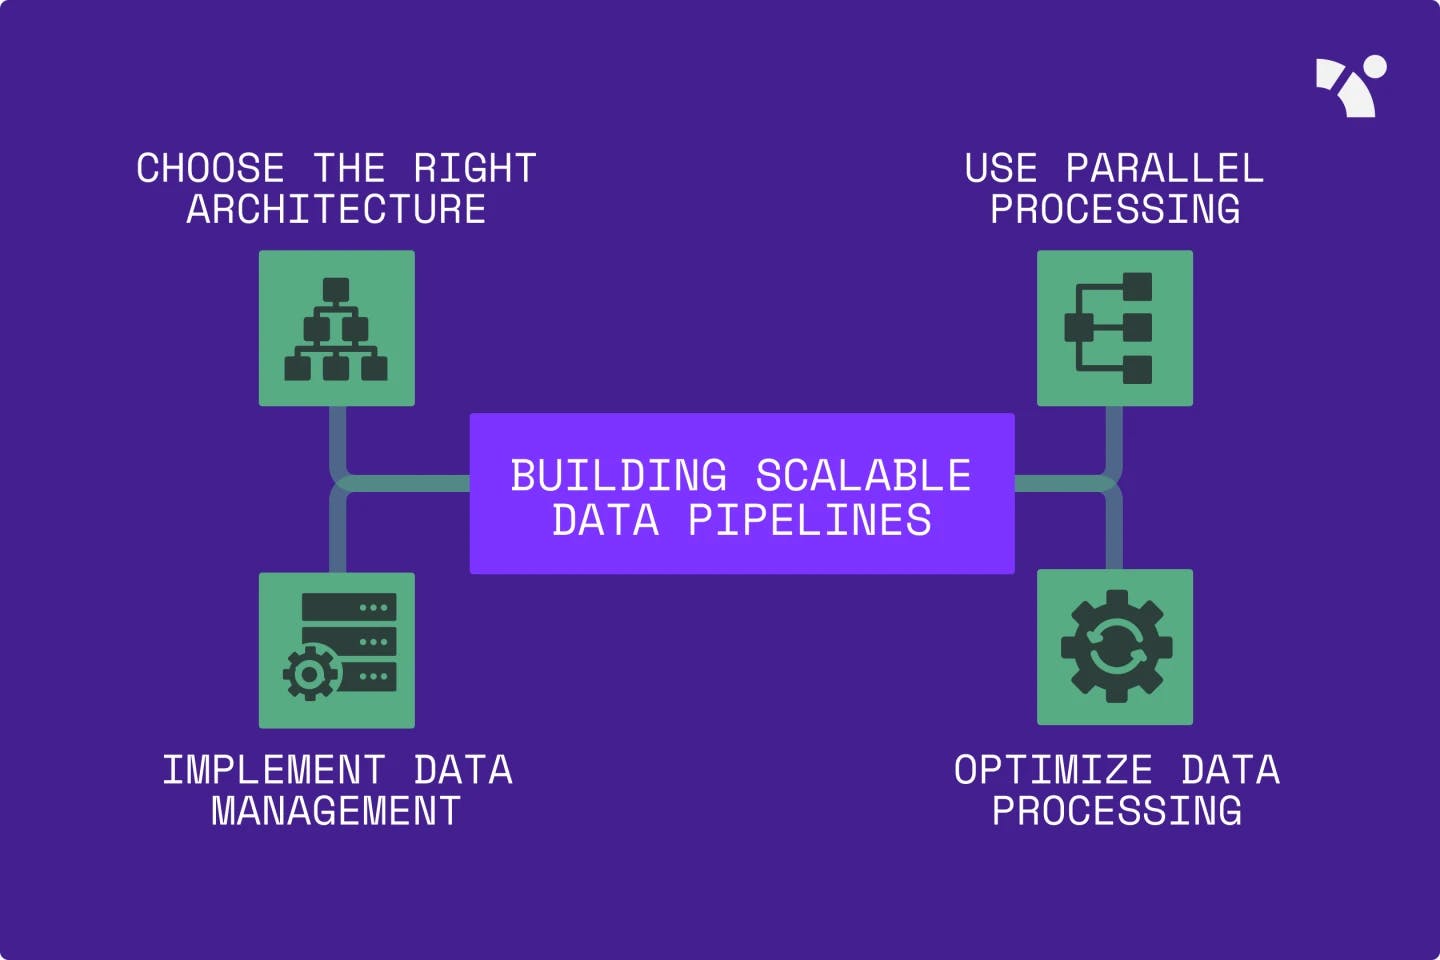 Building scalable data pipelines.